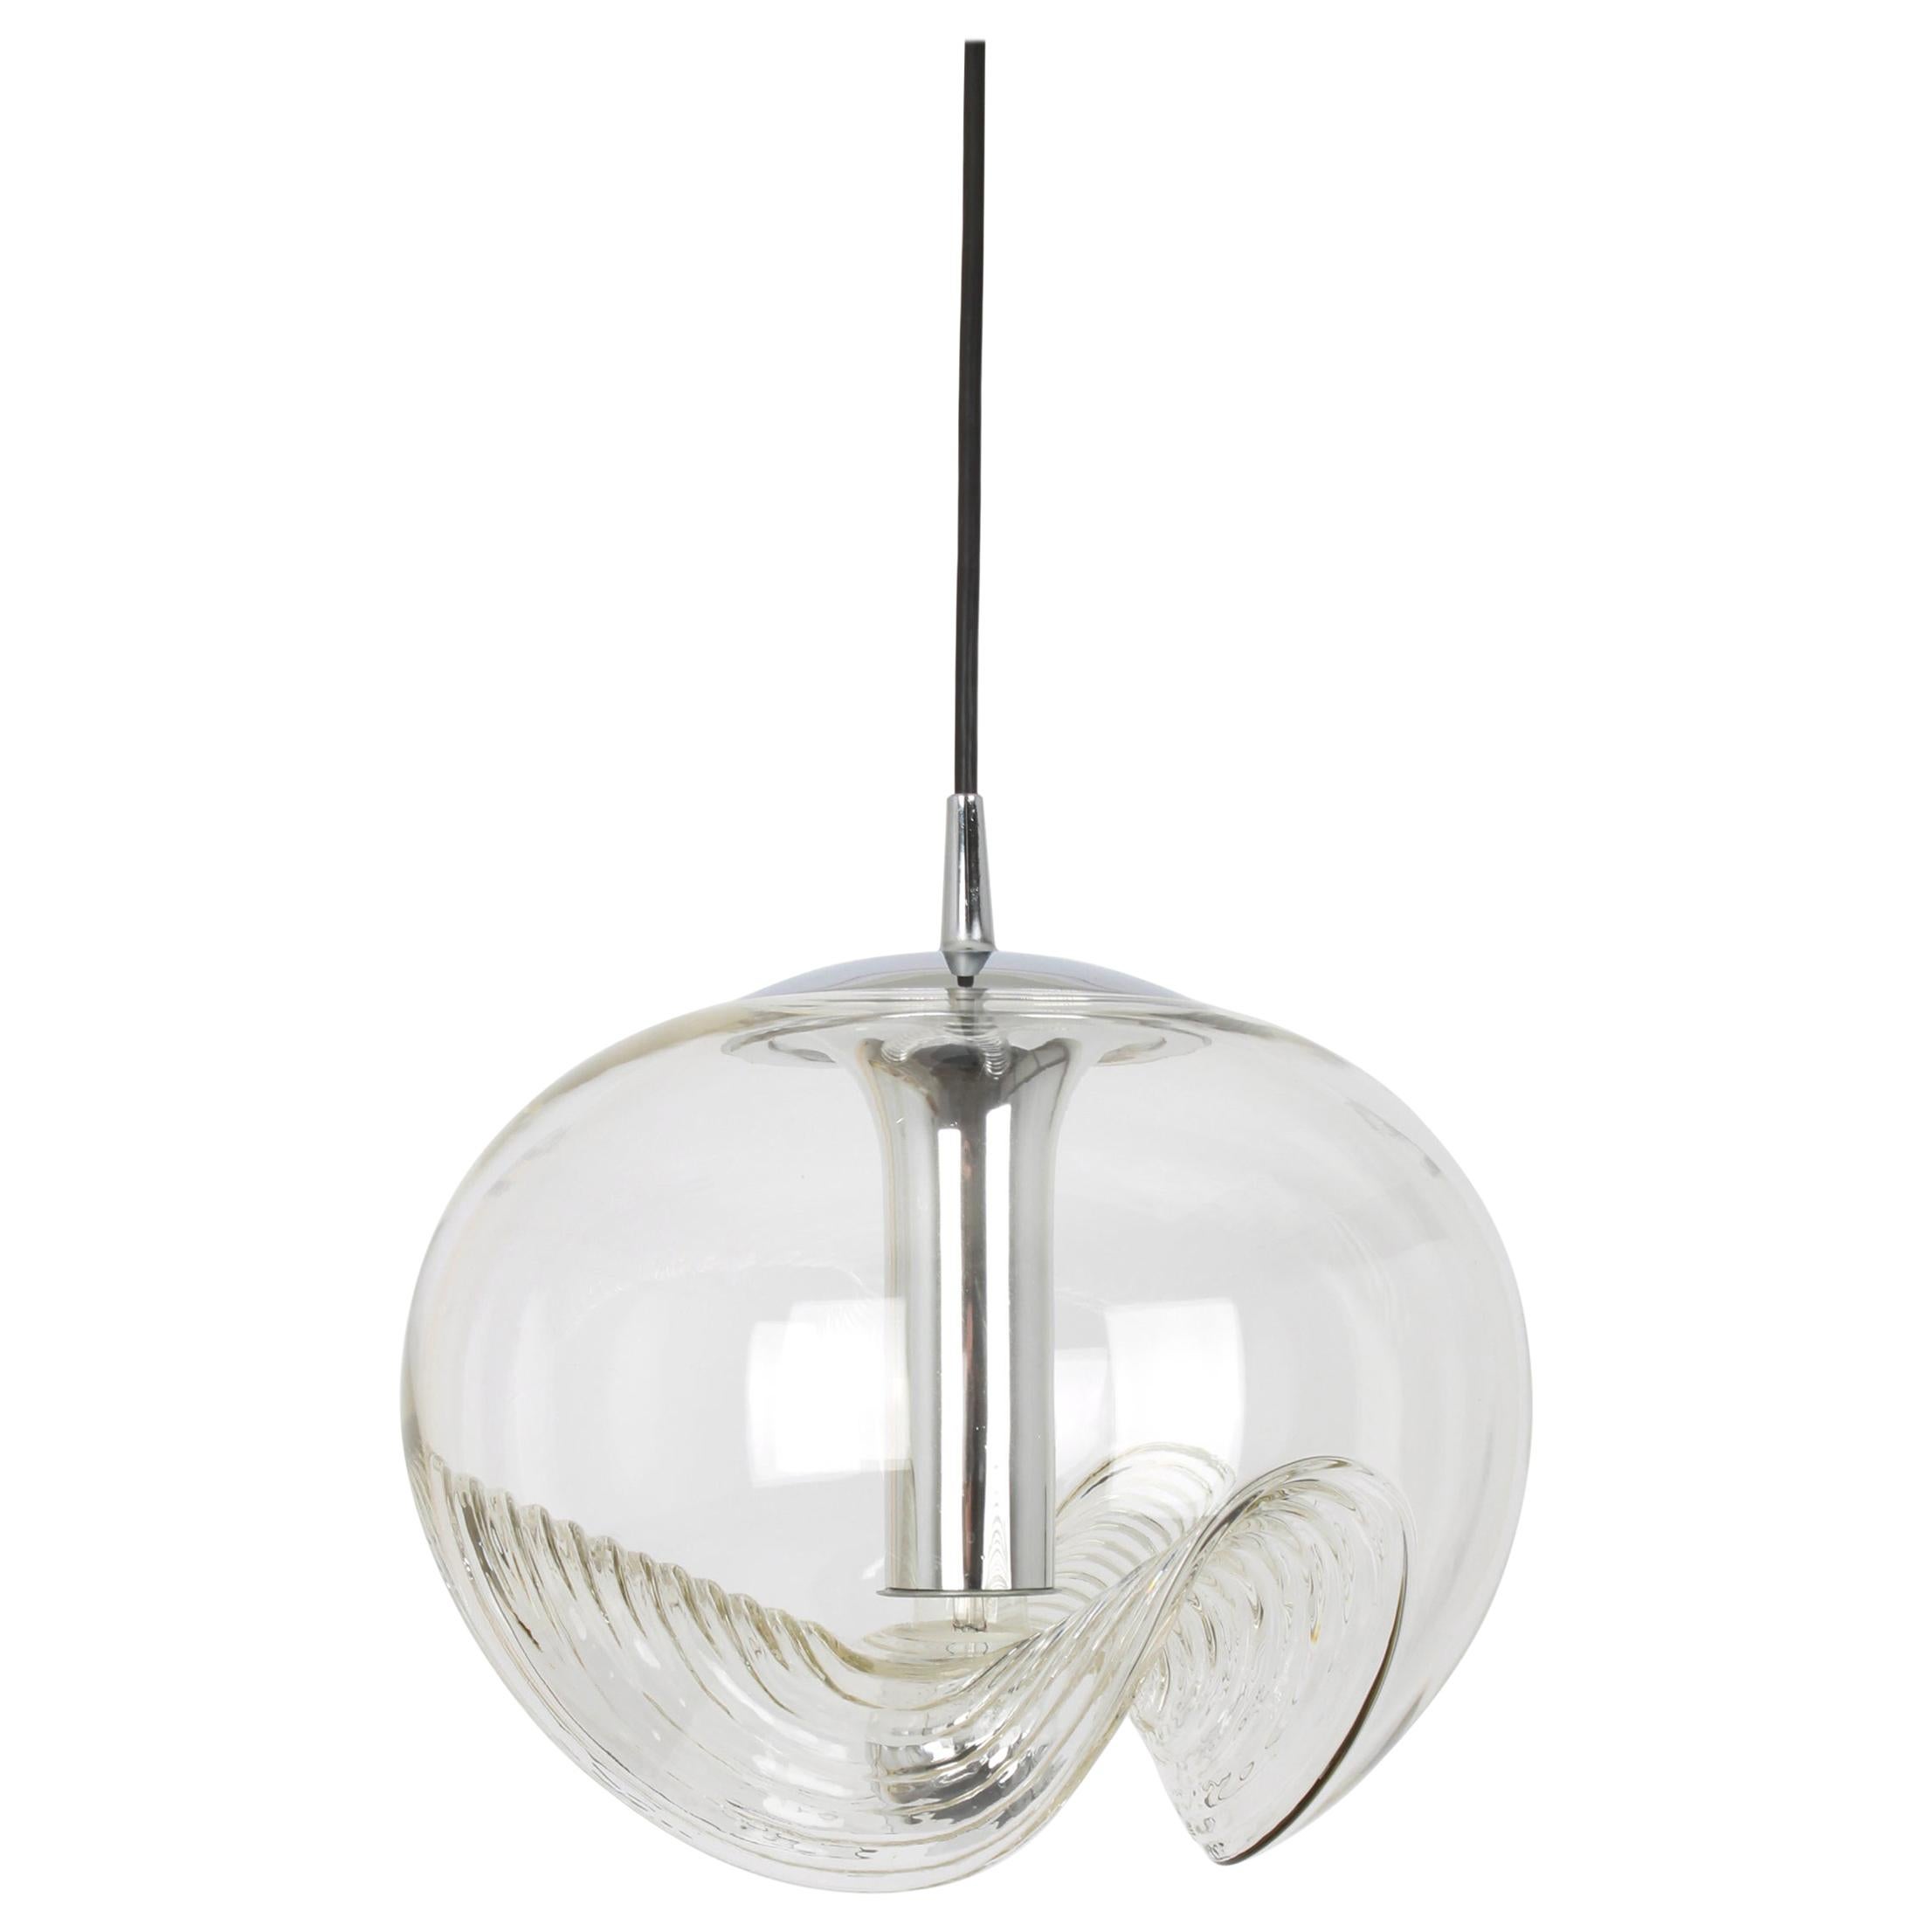 A special round biomorphic clear glass pendant designed by Koch & Lowy for Peill & Putzler, manufactured in Germany, circa 1970s.

High quality and in very good condition. Cleaned, well-wired and ready to use. 

The fixture requires 1 x E27